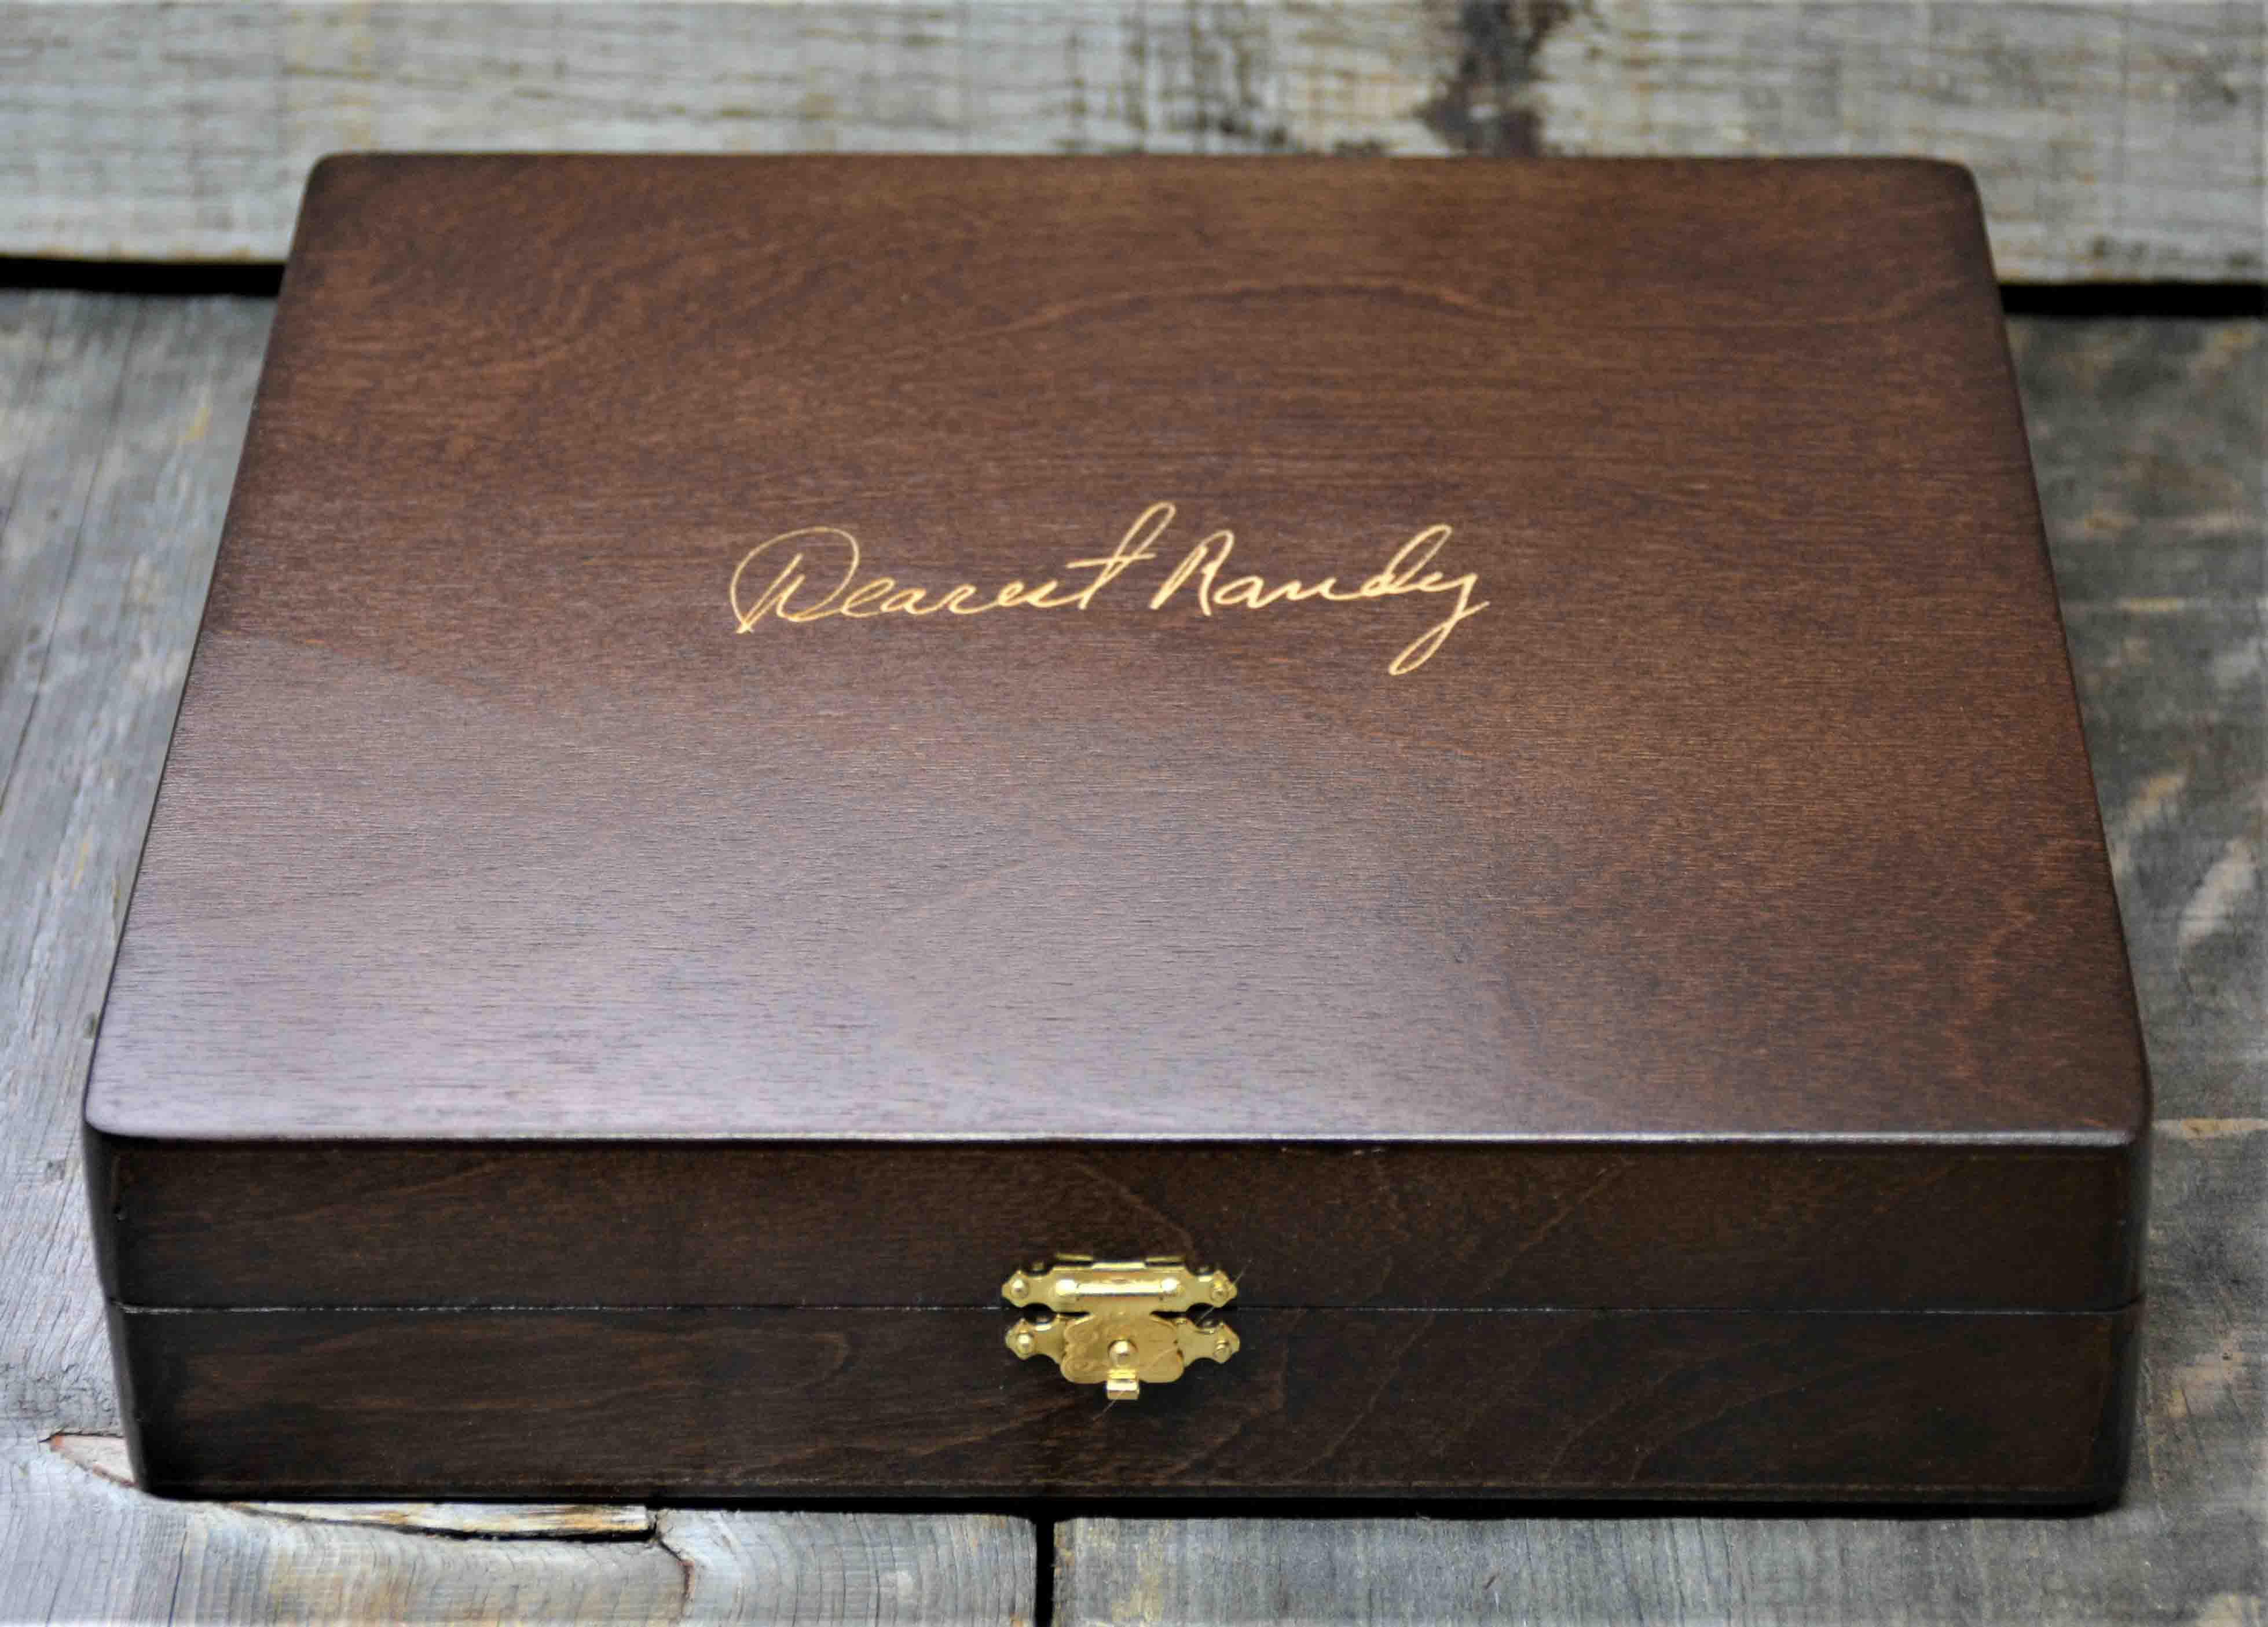 Handwriting Engraved into Premium Wooden Gift Box.